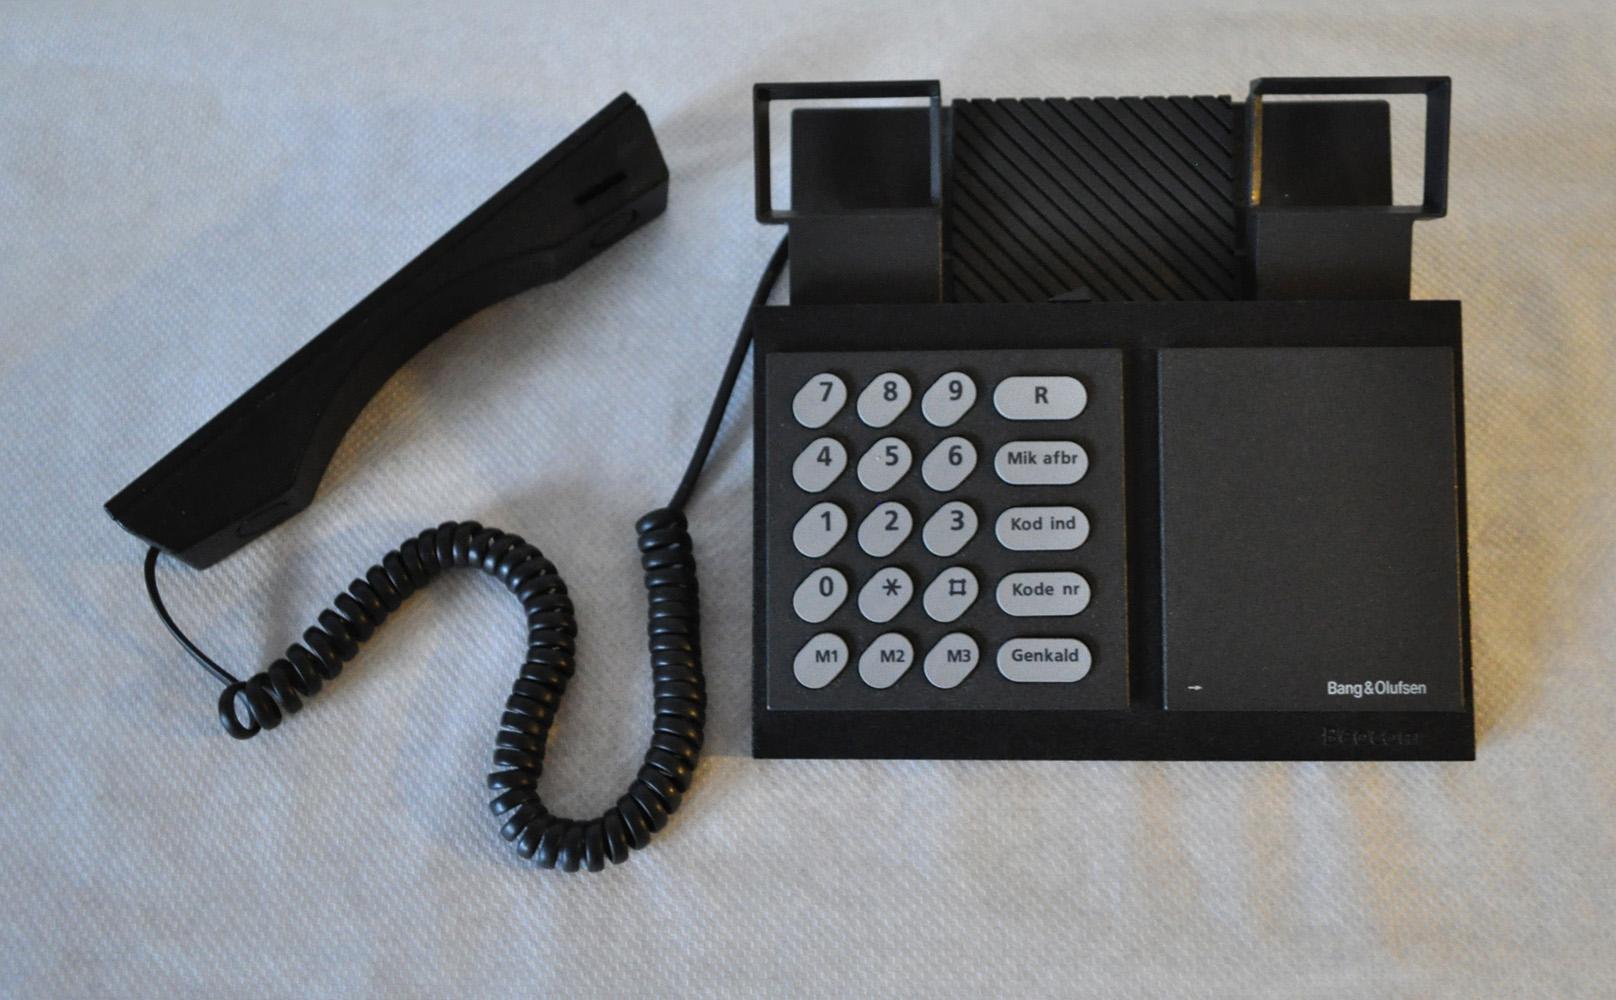 Late 20th Century Iconic Beocom 600 Telephone from 1986 by Bang & Olusfen For Sale